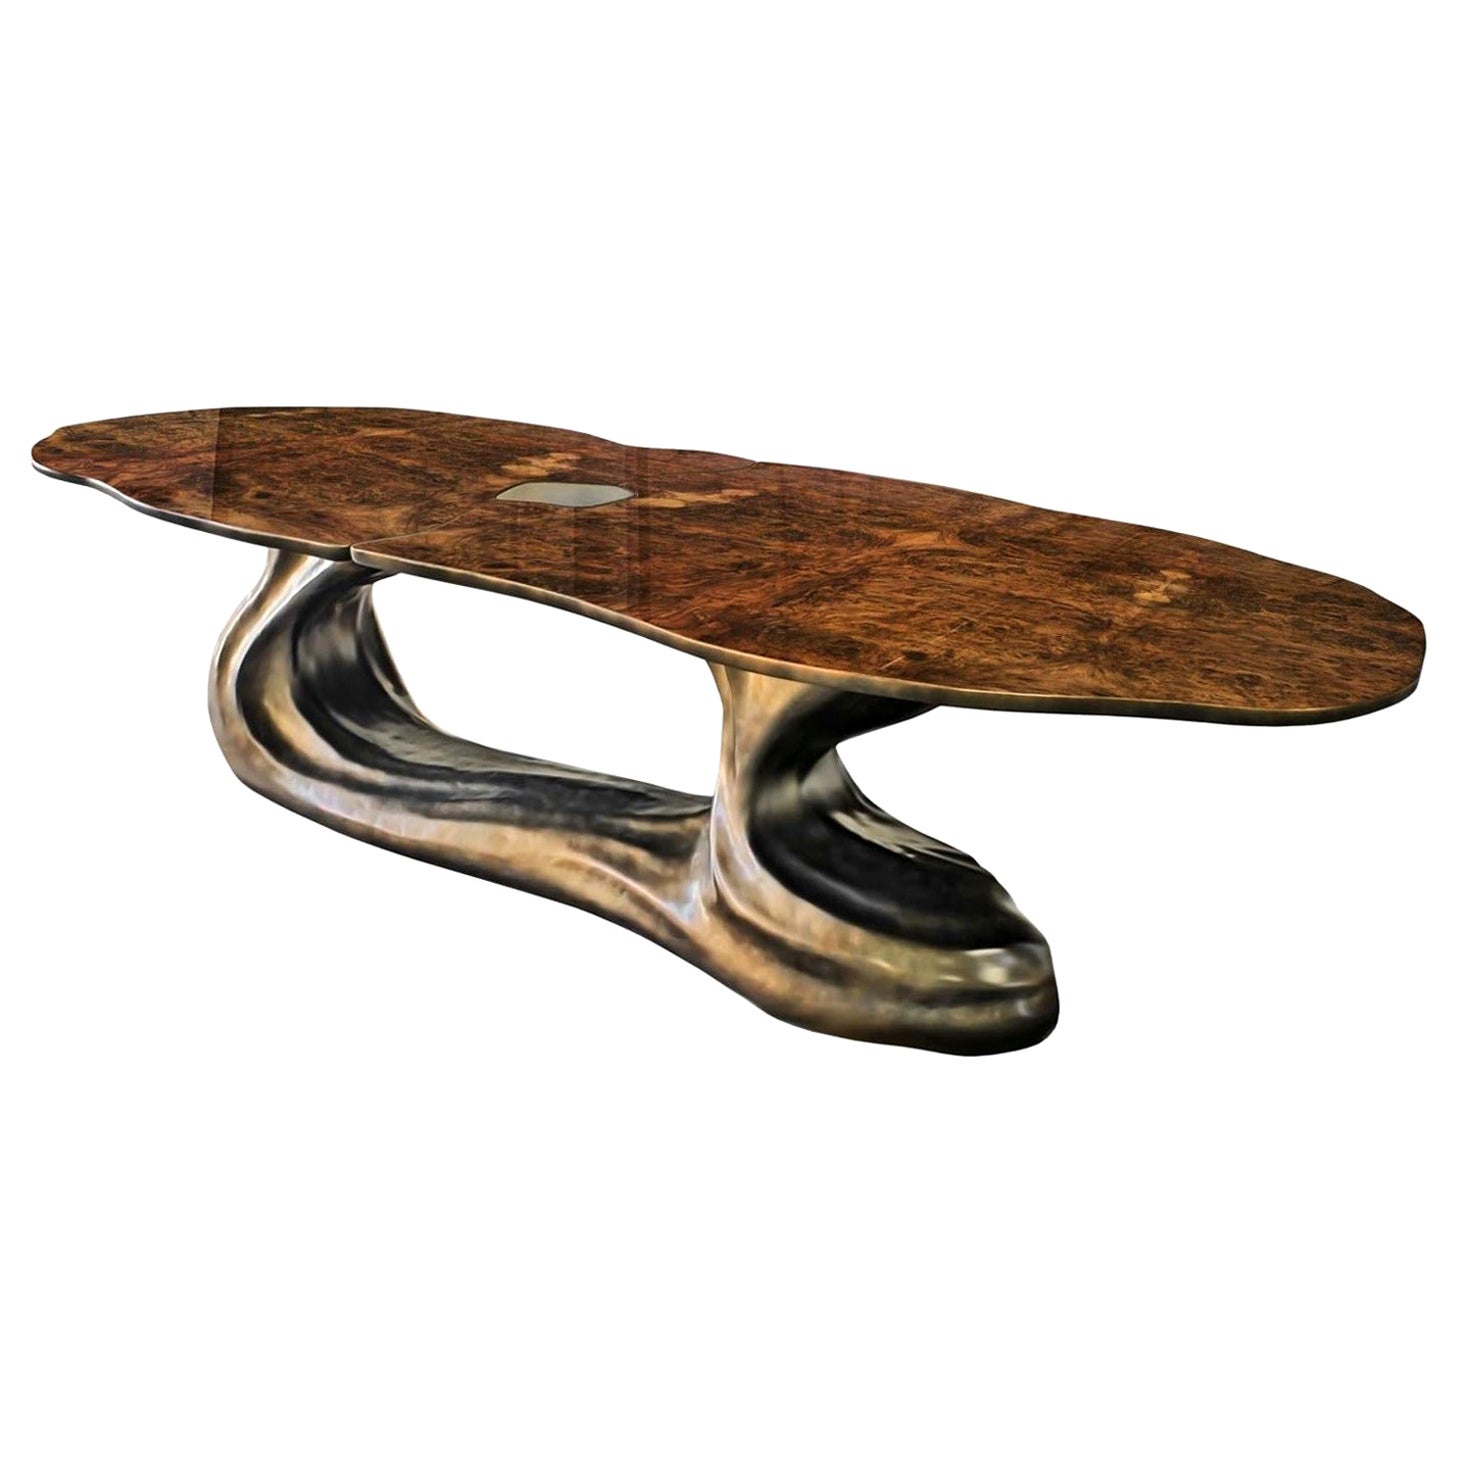 New Design Dining Table in Walnut Veneer for 10/12 Persons Ready Delivery Now